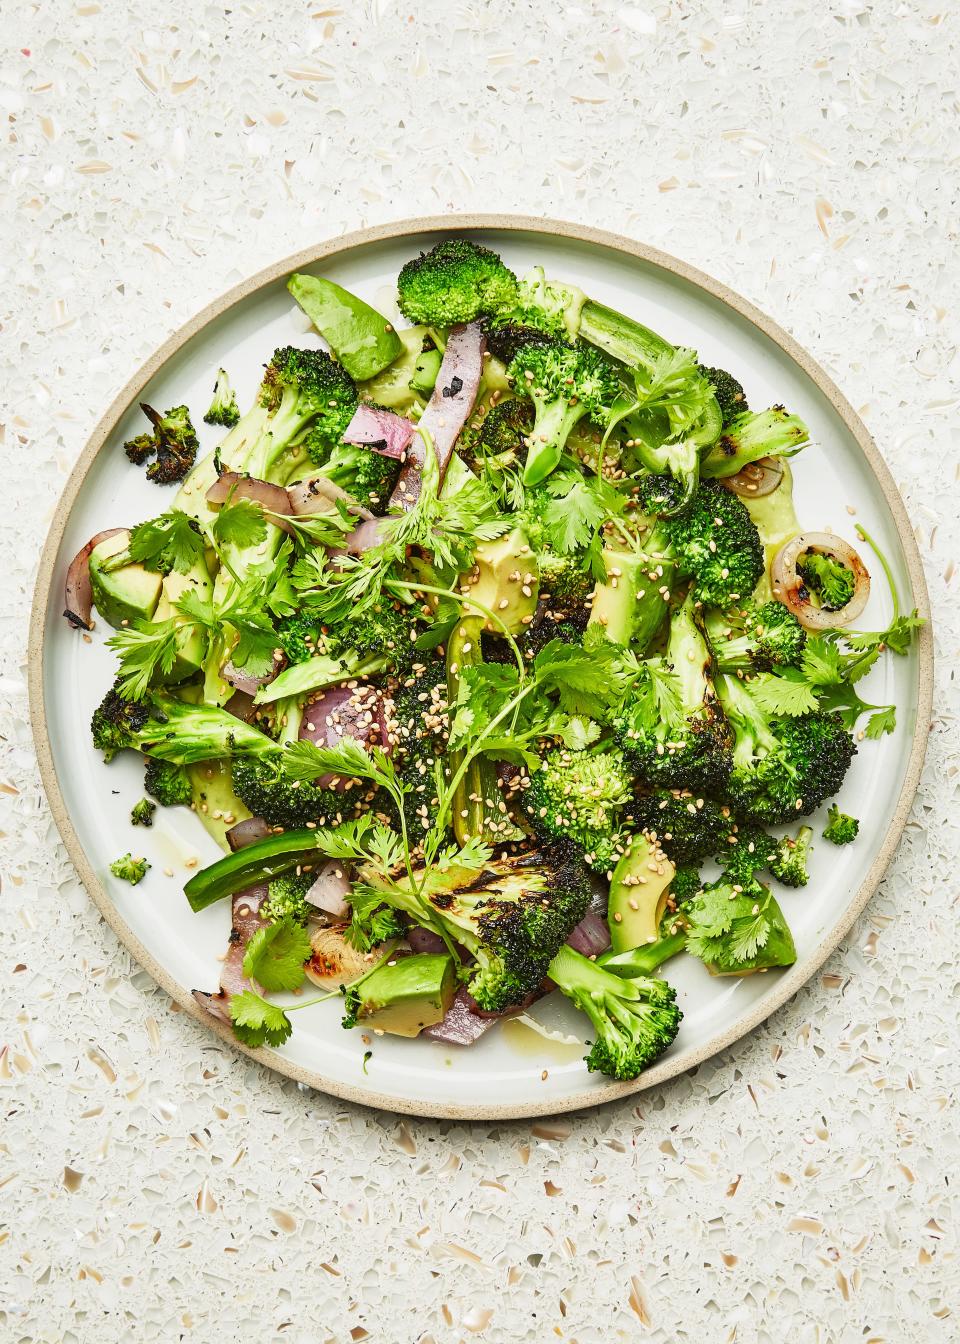 Grilled Broccoli with Avocado and Sesame